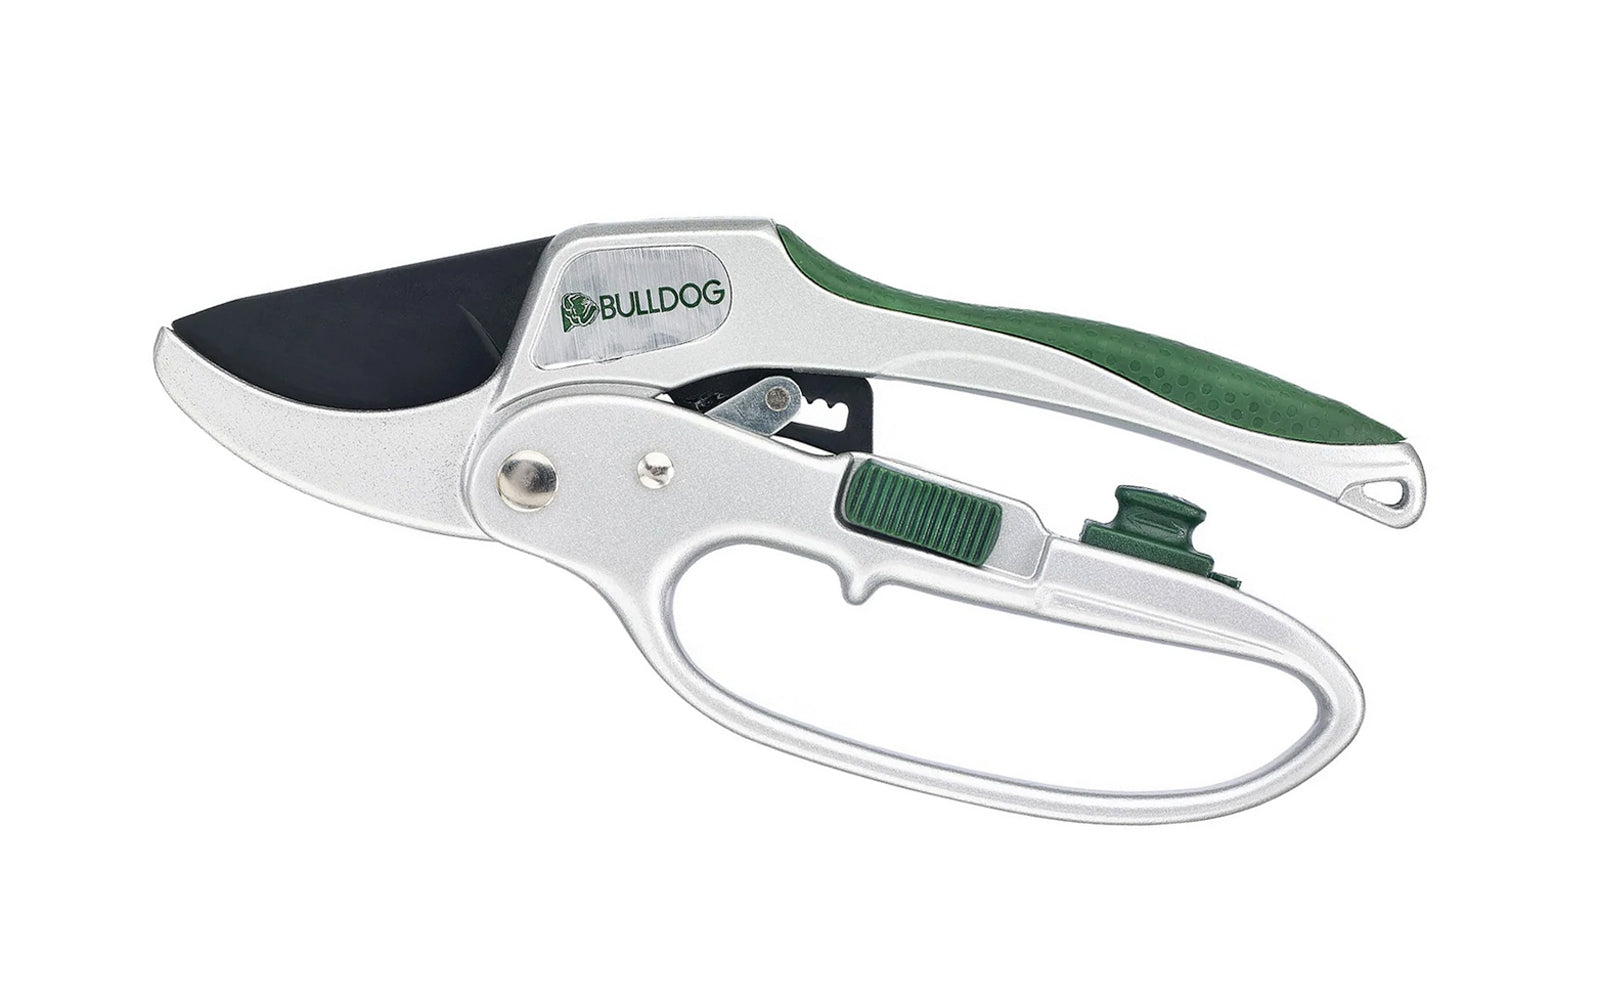 These Ratchet Secateurs / Pruning Shears are made by Bulldog Tools. The ratchet mechanism will help cut through thicker twigs & branches. 20 mm cutting diameter capacity.  Bulldog Tools forged heads are tested to & exceed British standard BS3388.